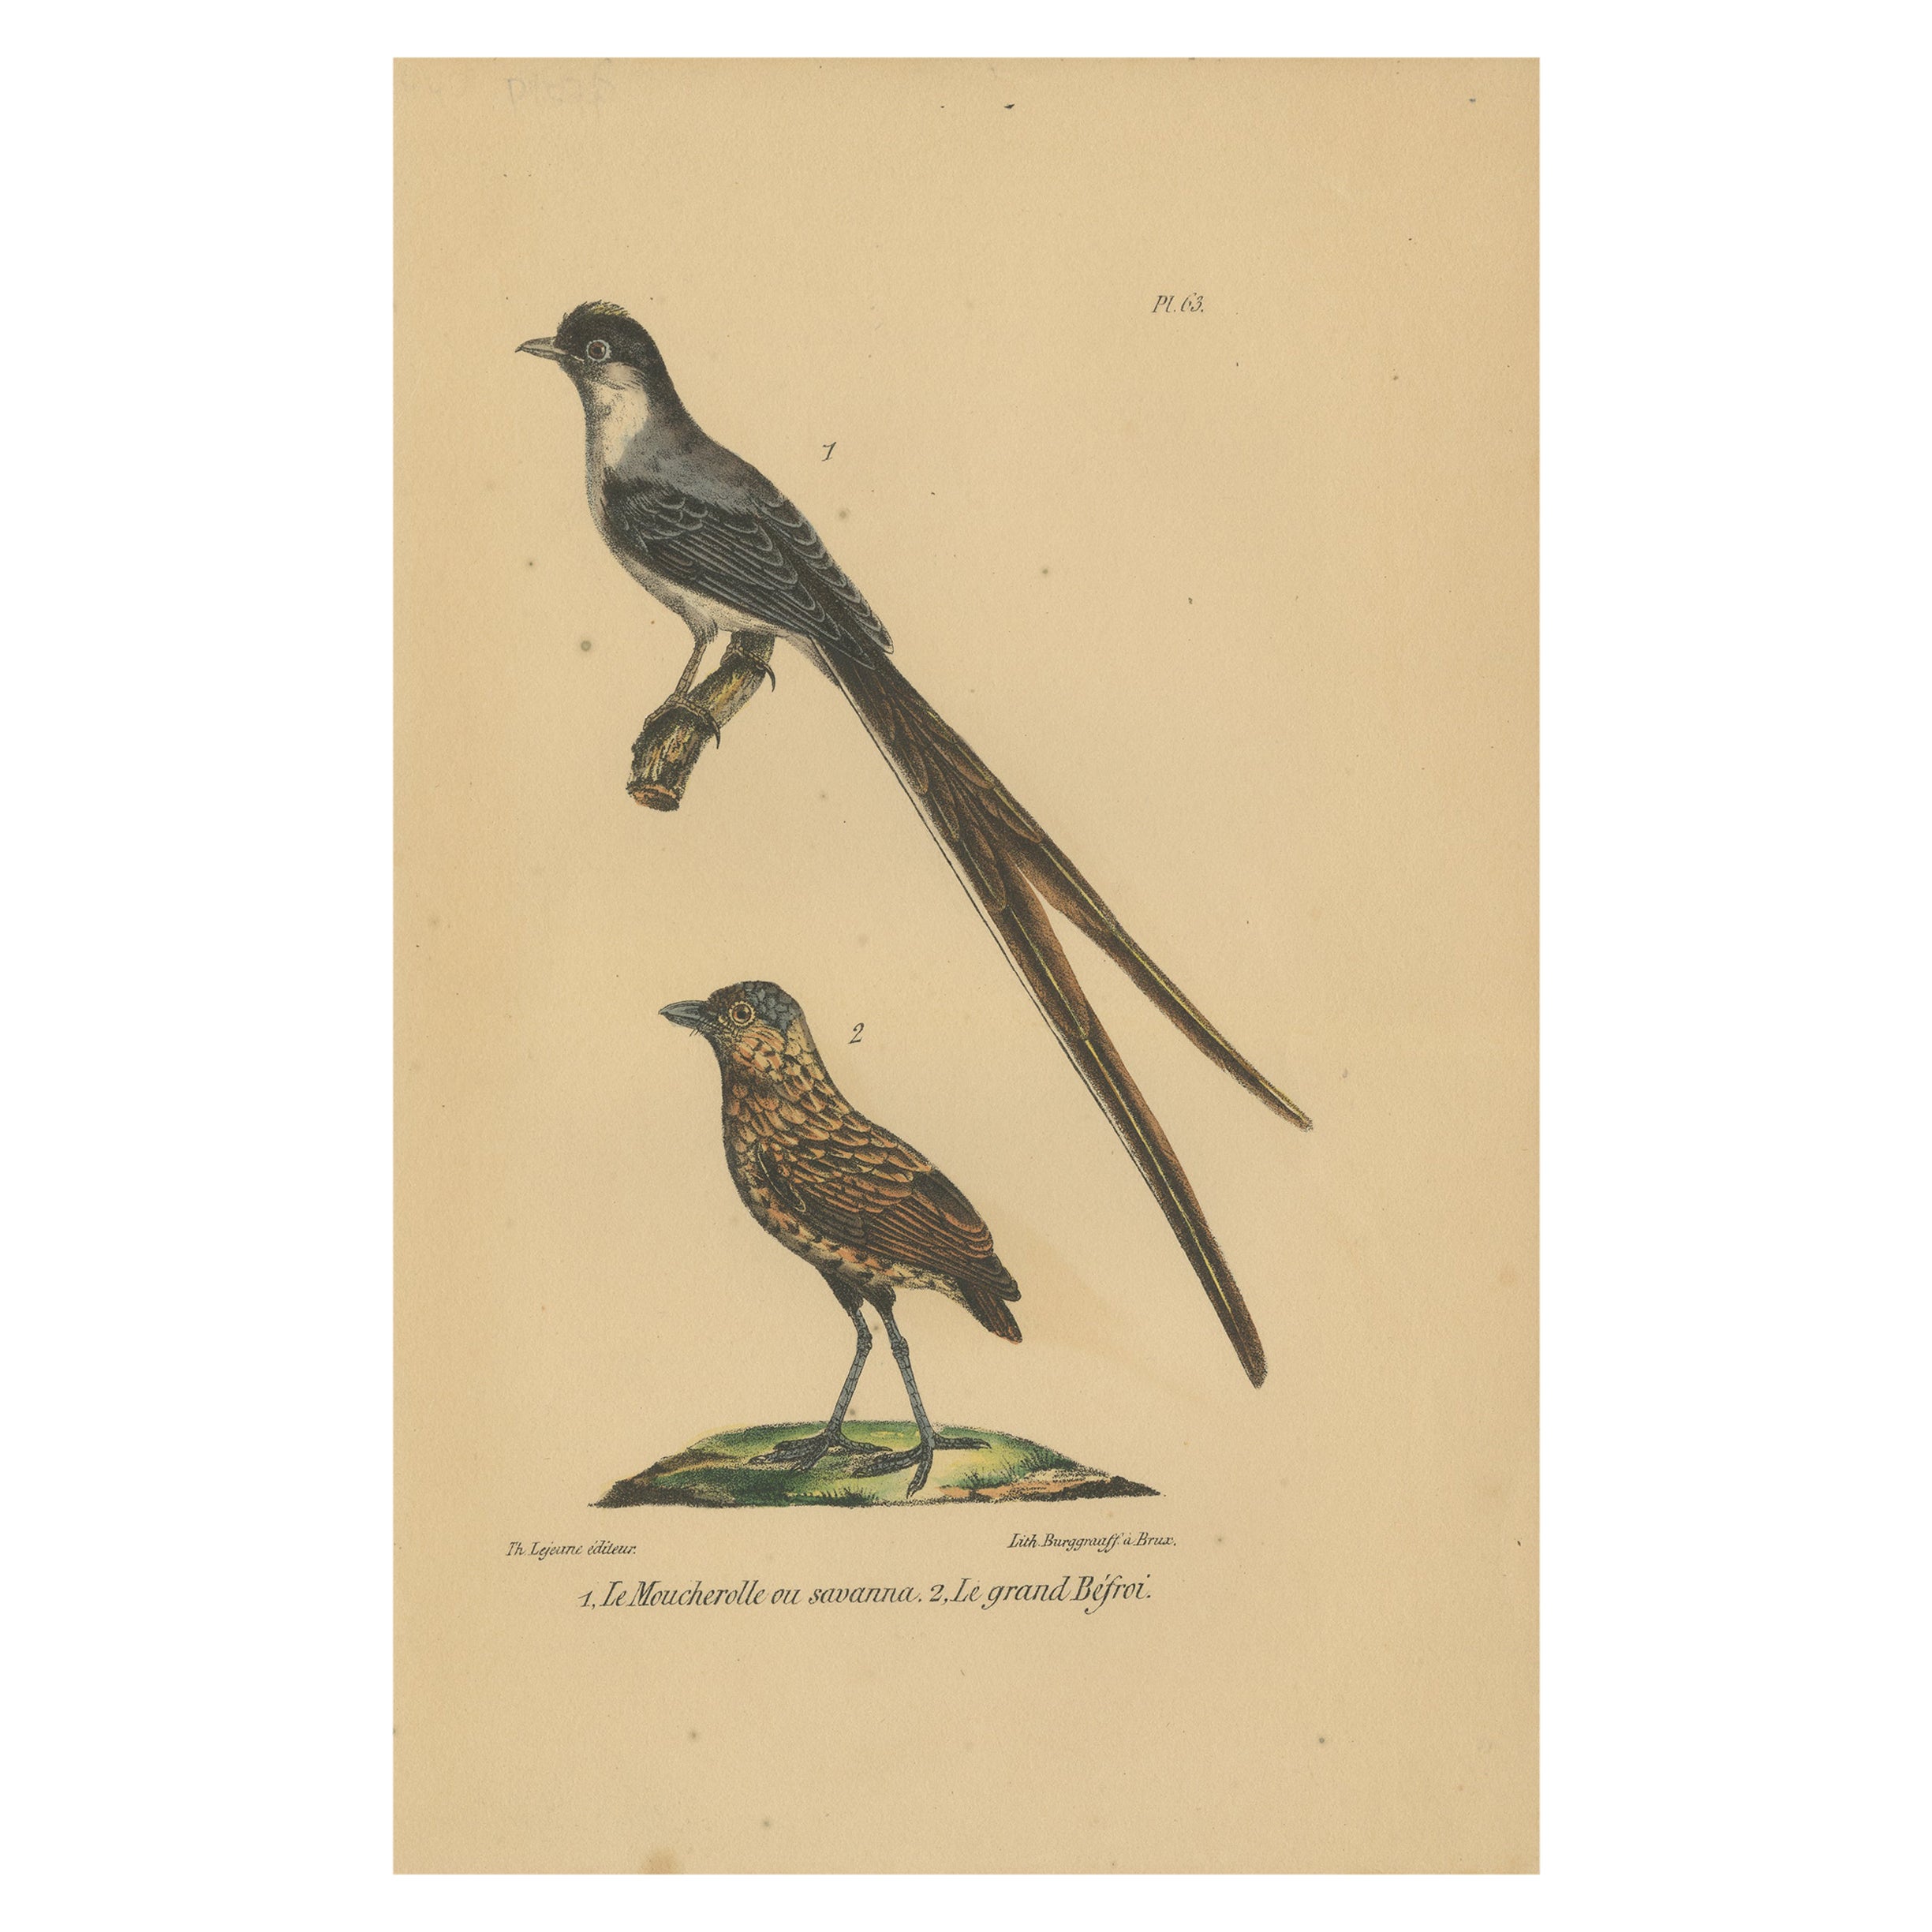 Pl. 63 Antique Bird Print of a Flycatcher and Antpitta by Lejeune 'c.1830' For Sale